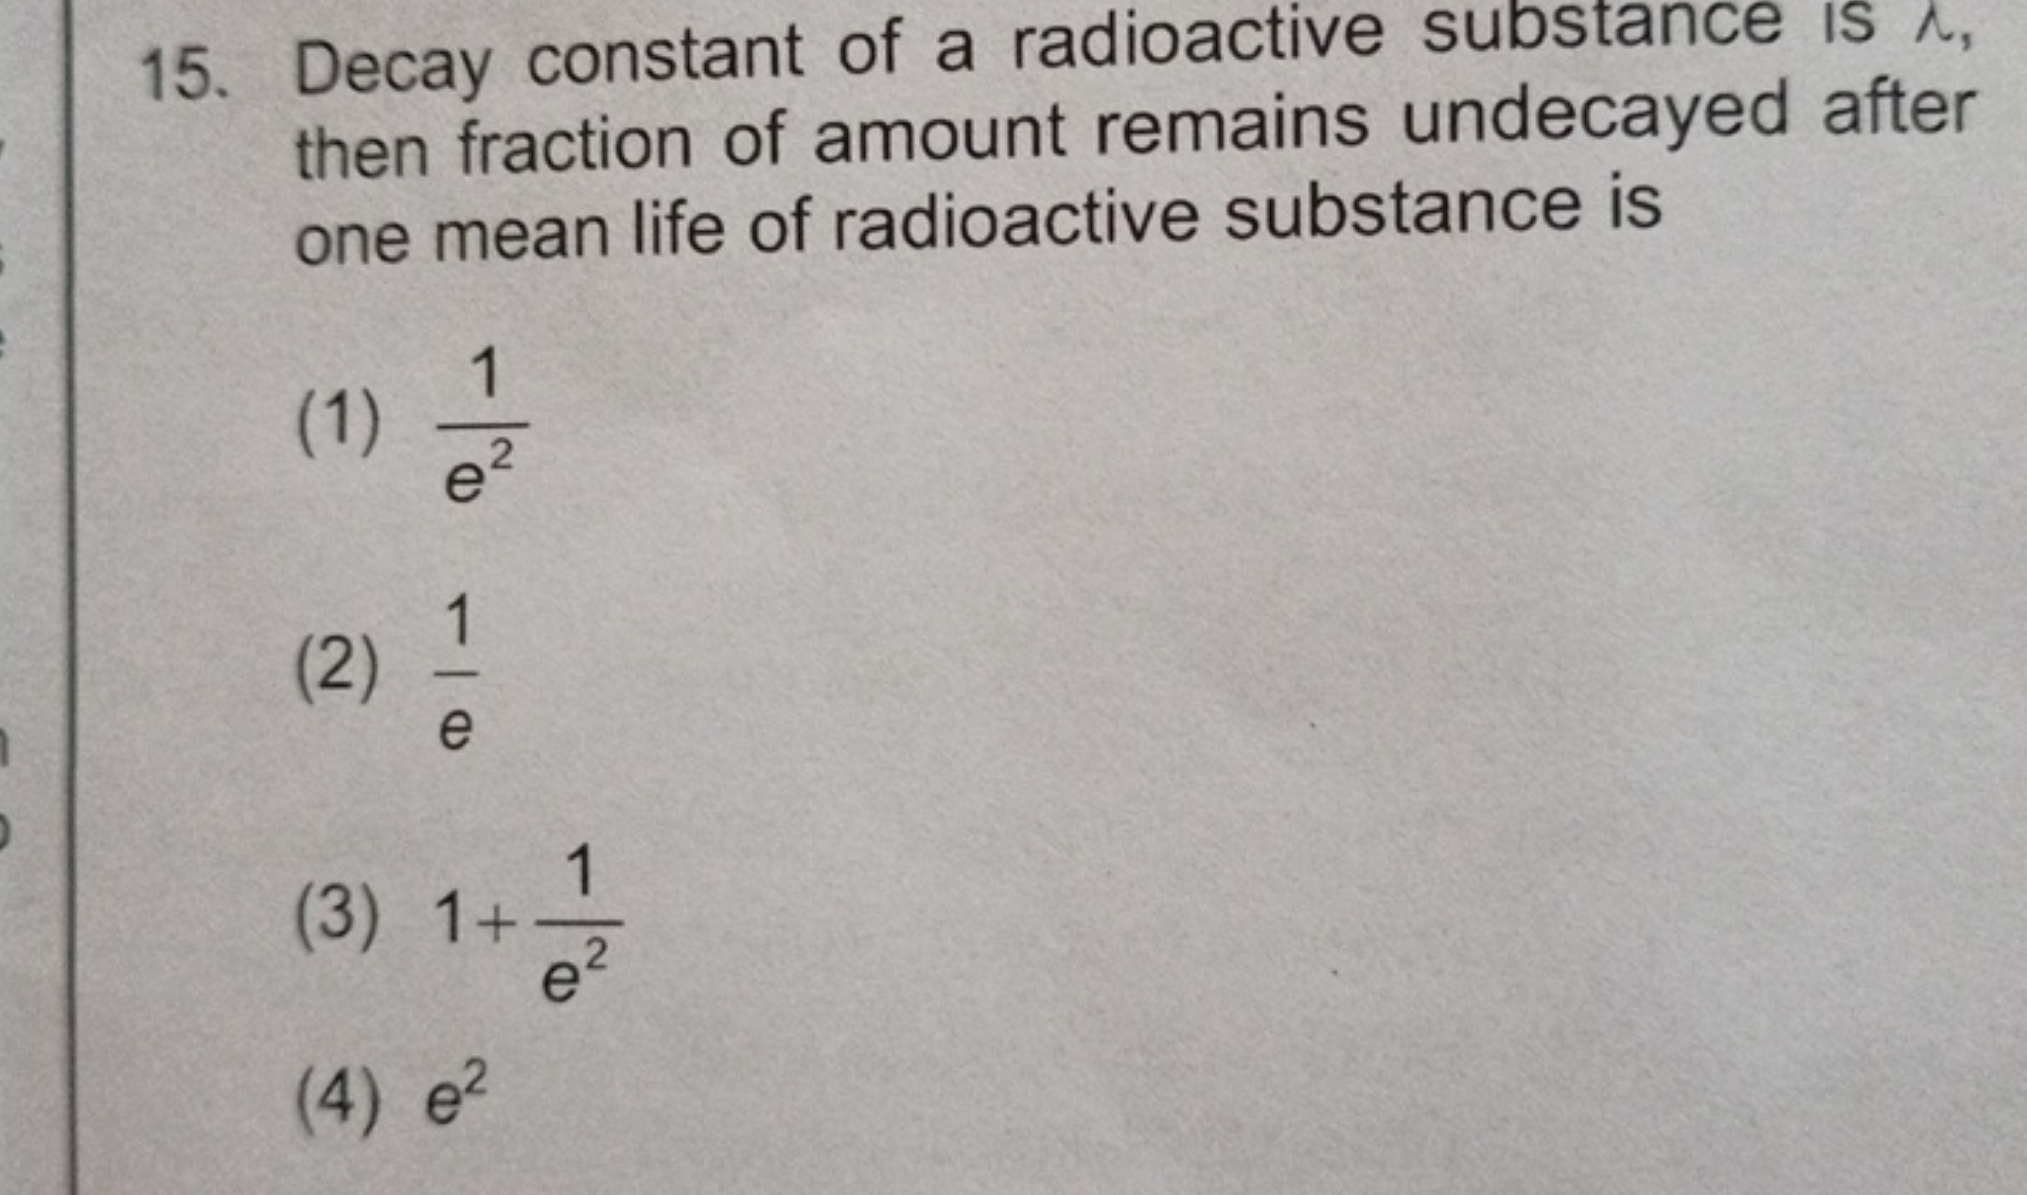 Decay constant of a radioactive substance is Λ, then fraction of amoun